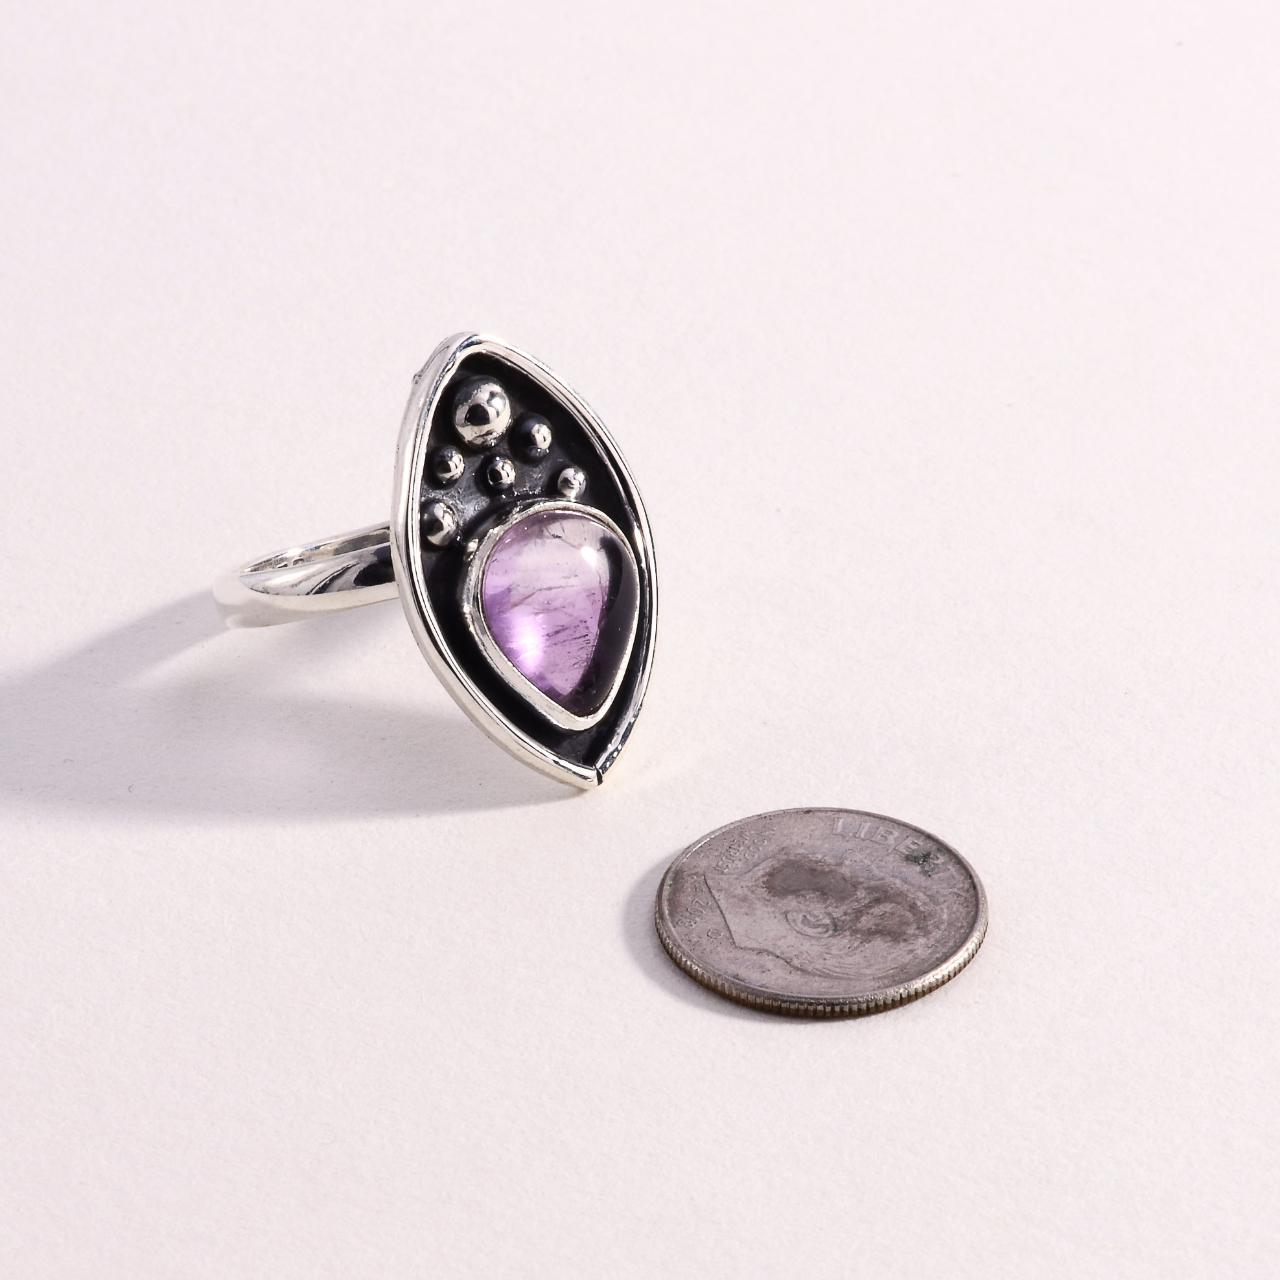 Product Image 3 - Sterling 925 Amethyst Ring

Sterling Silver

Size